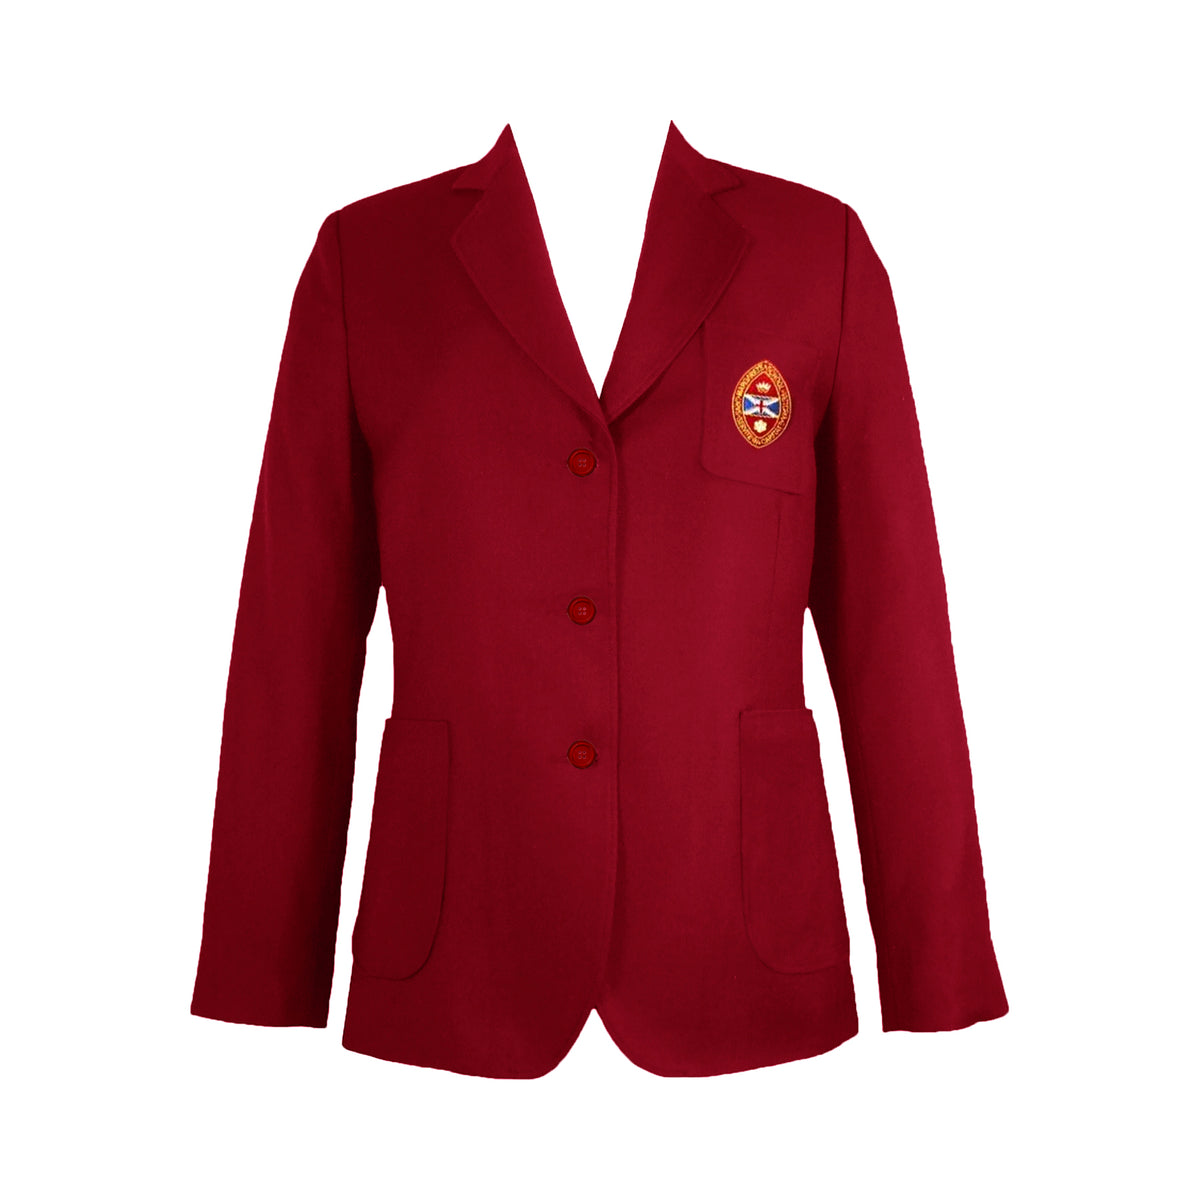 SMS EMBROIDERED BLAZER, MELTON, RED BUTTONS, LADIES